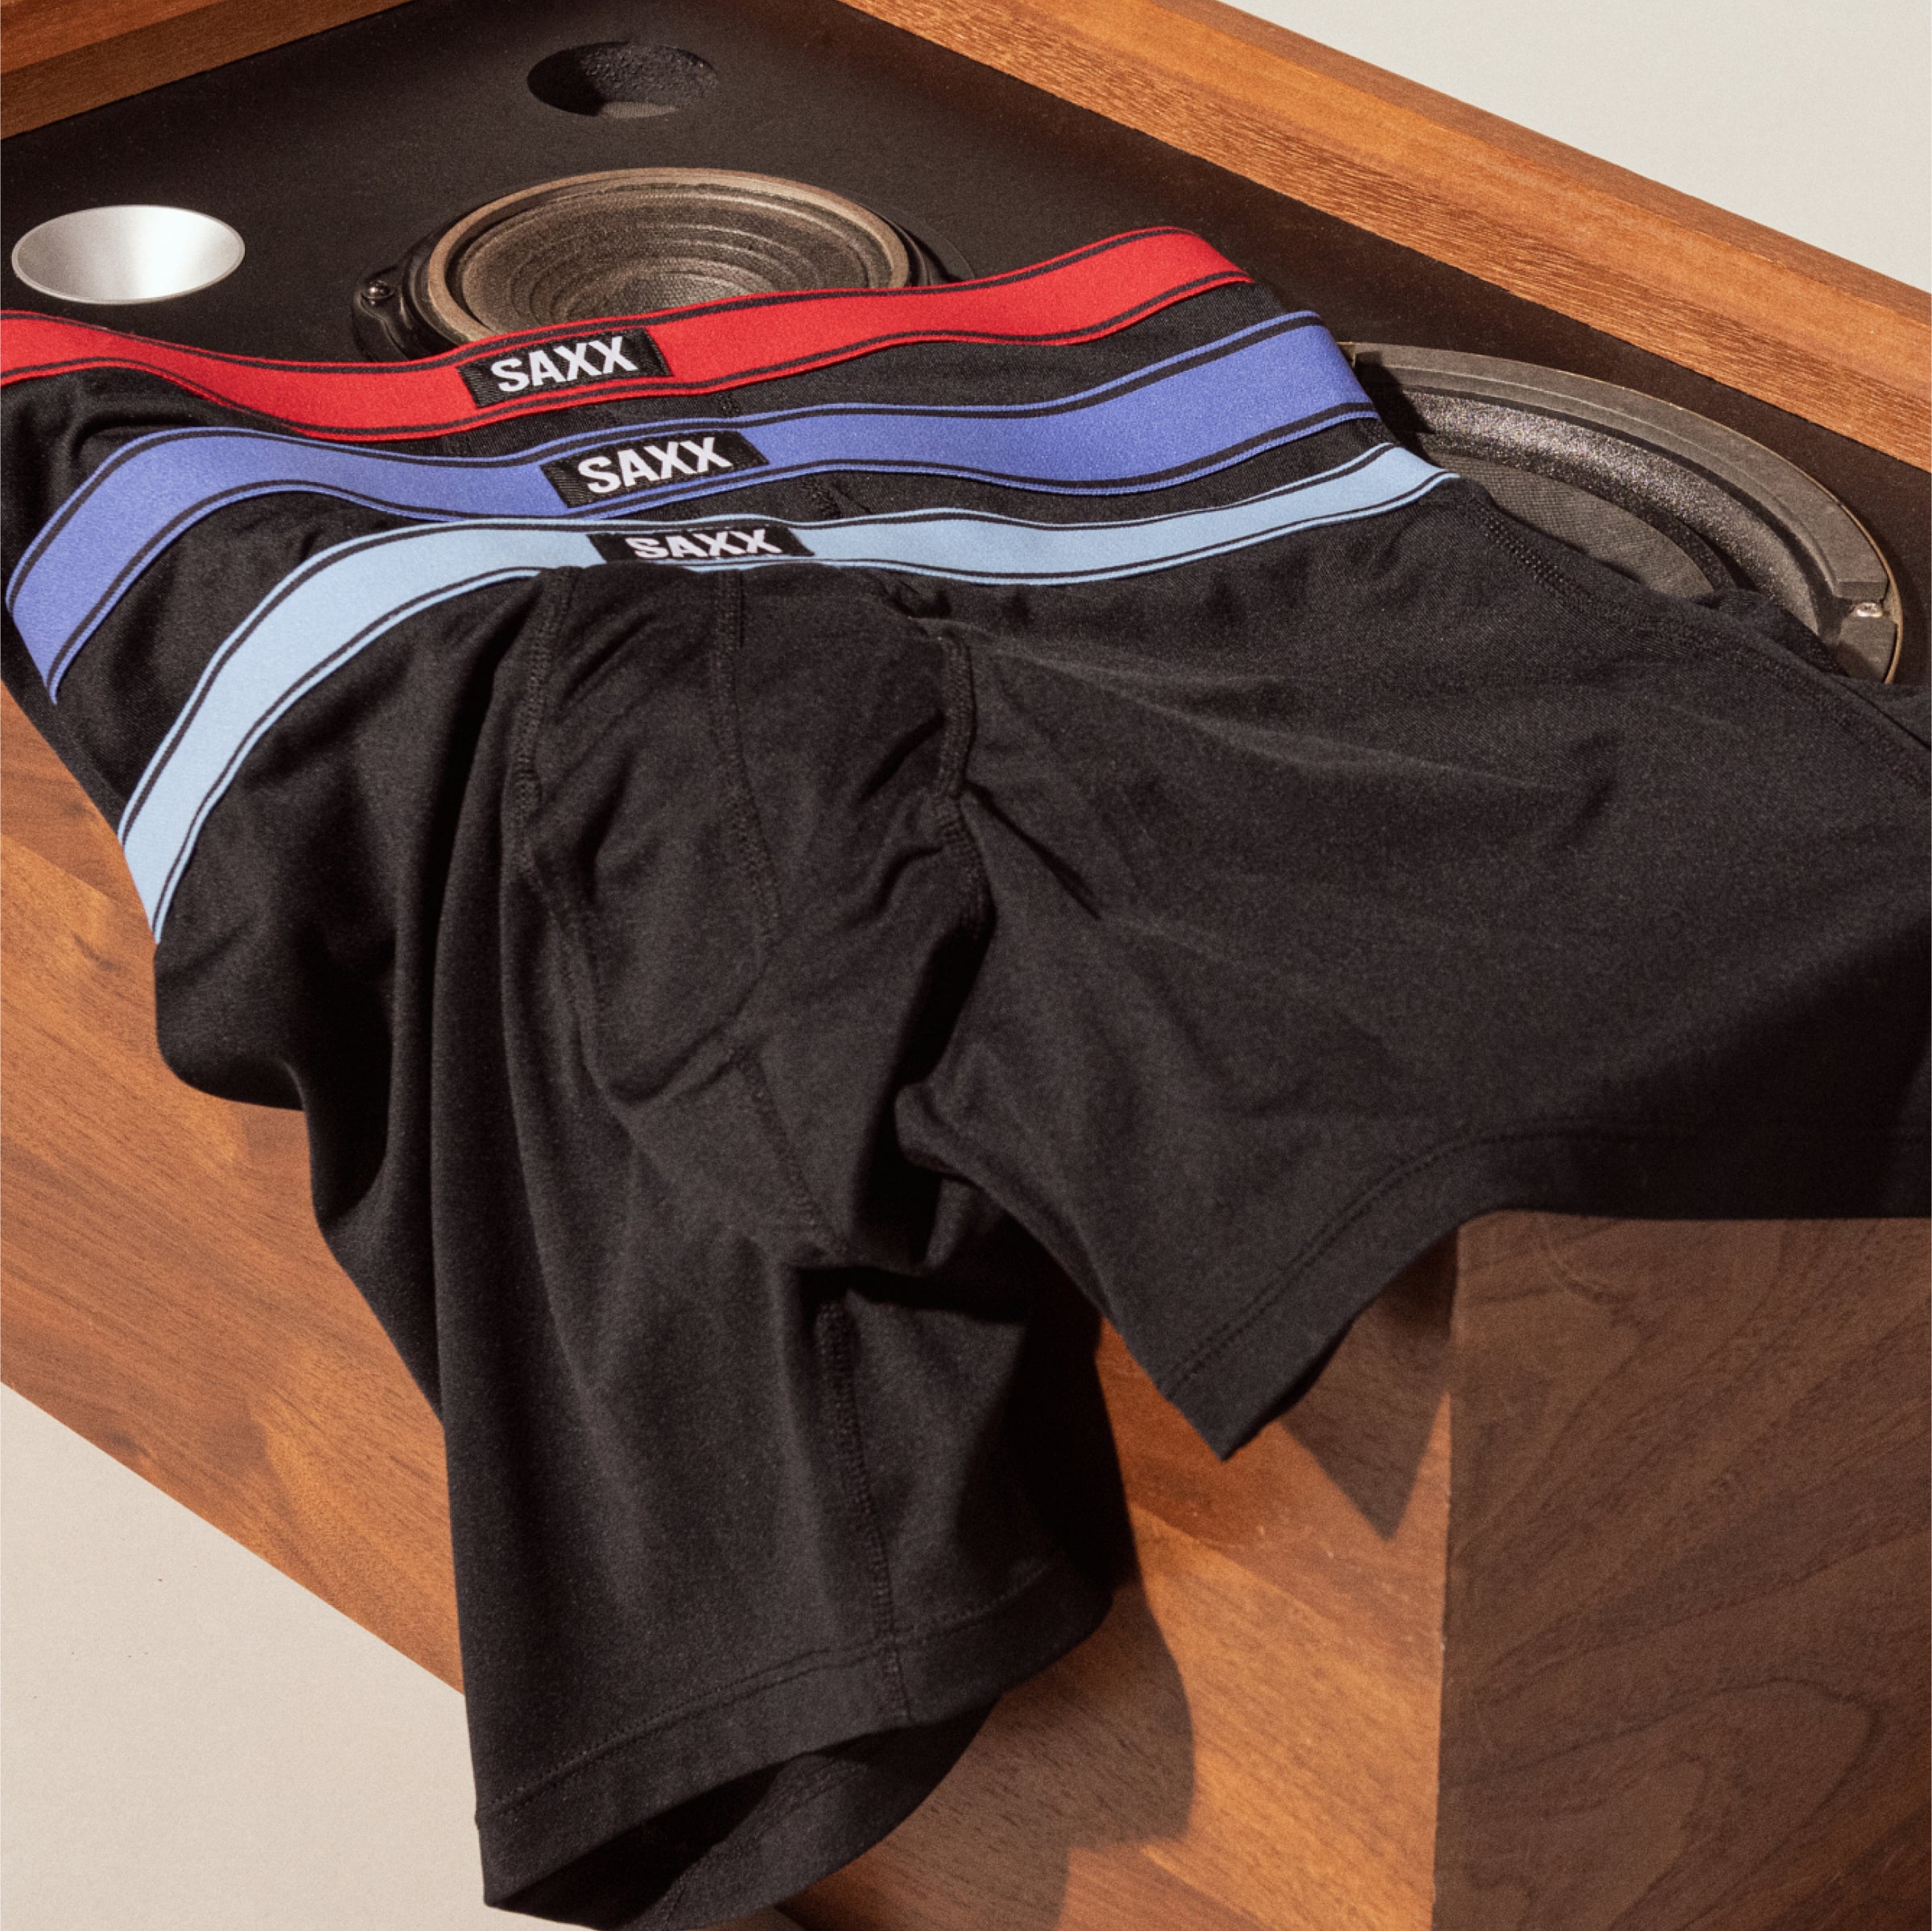 Three pairs of black boxer briefs are laid on a flat surface. Each has a different color waistband: one red, one dark blue, one light blue.